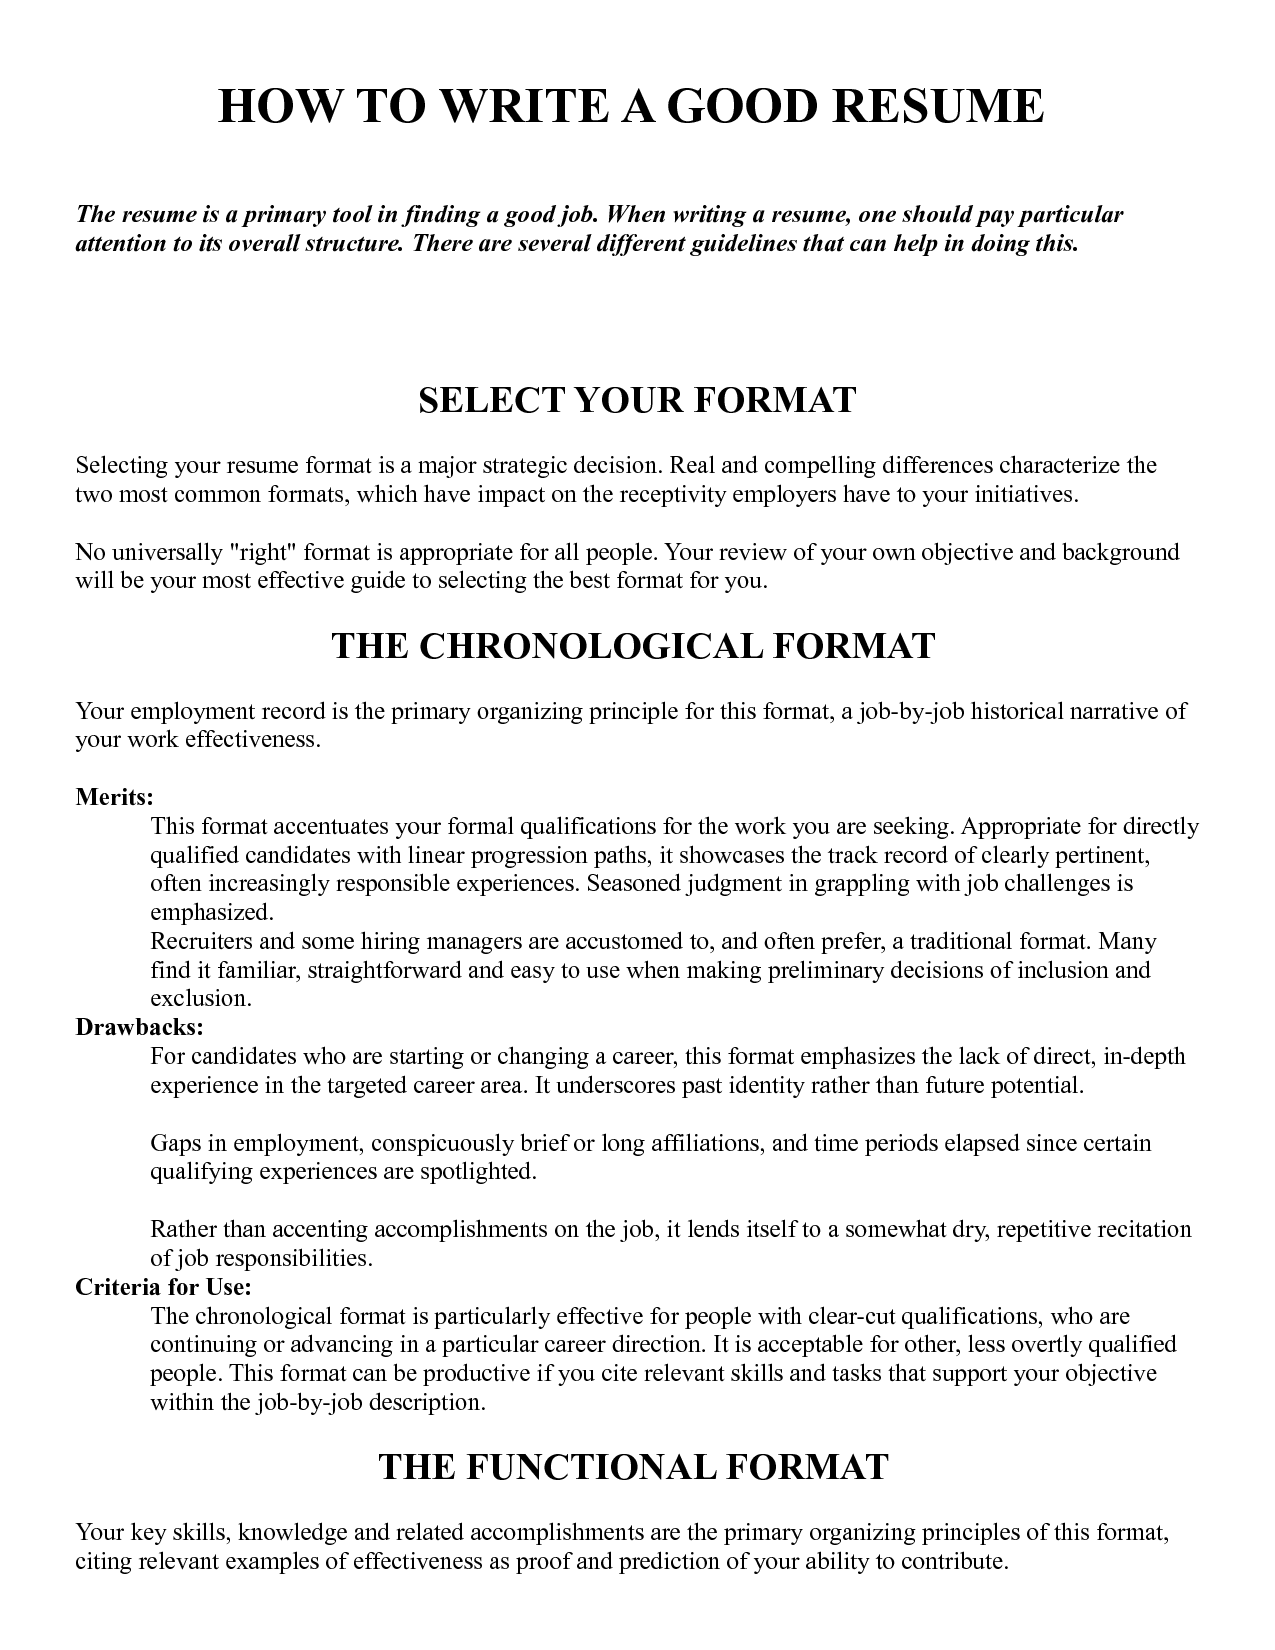 How to write a good resume (pays attention to its overall ...